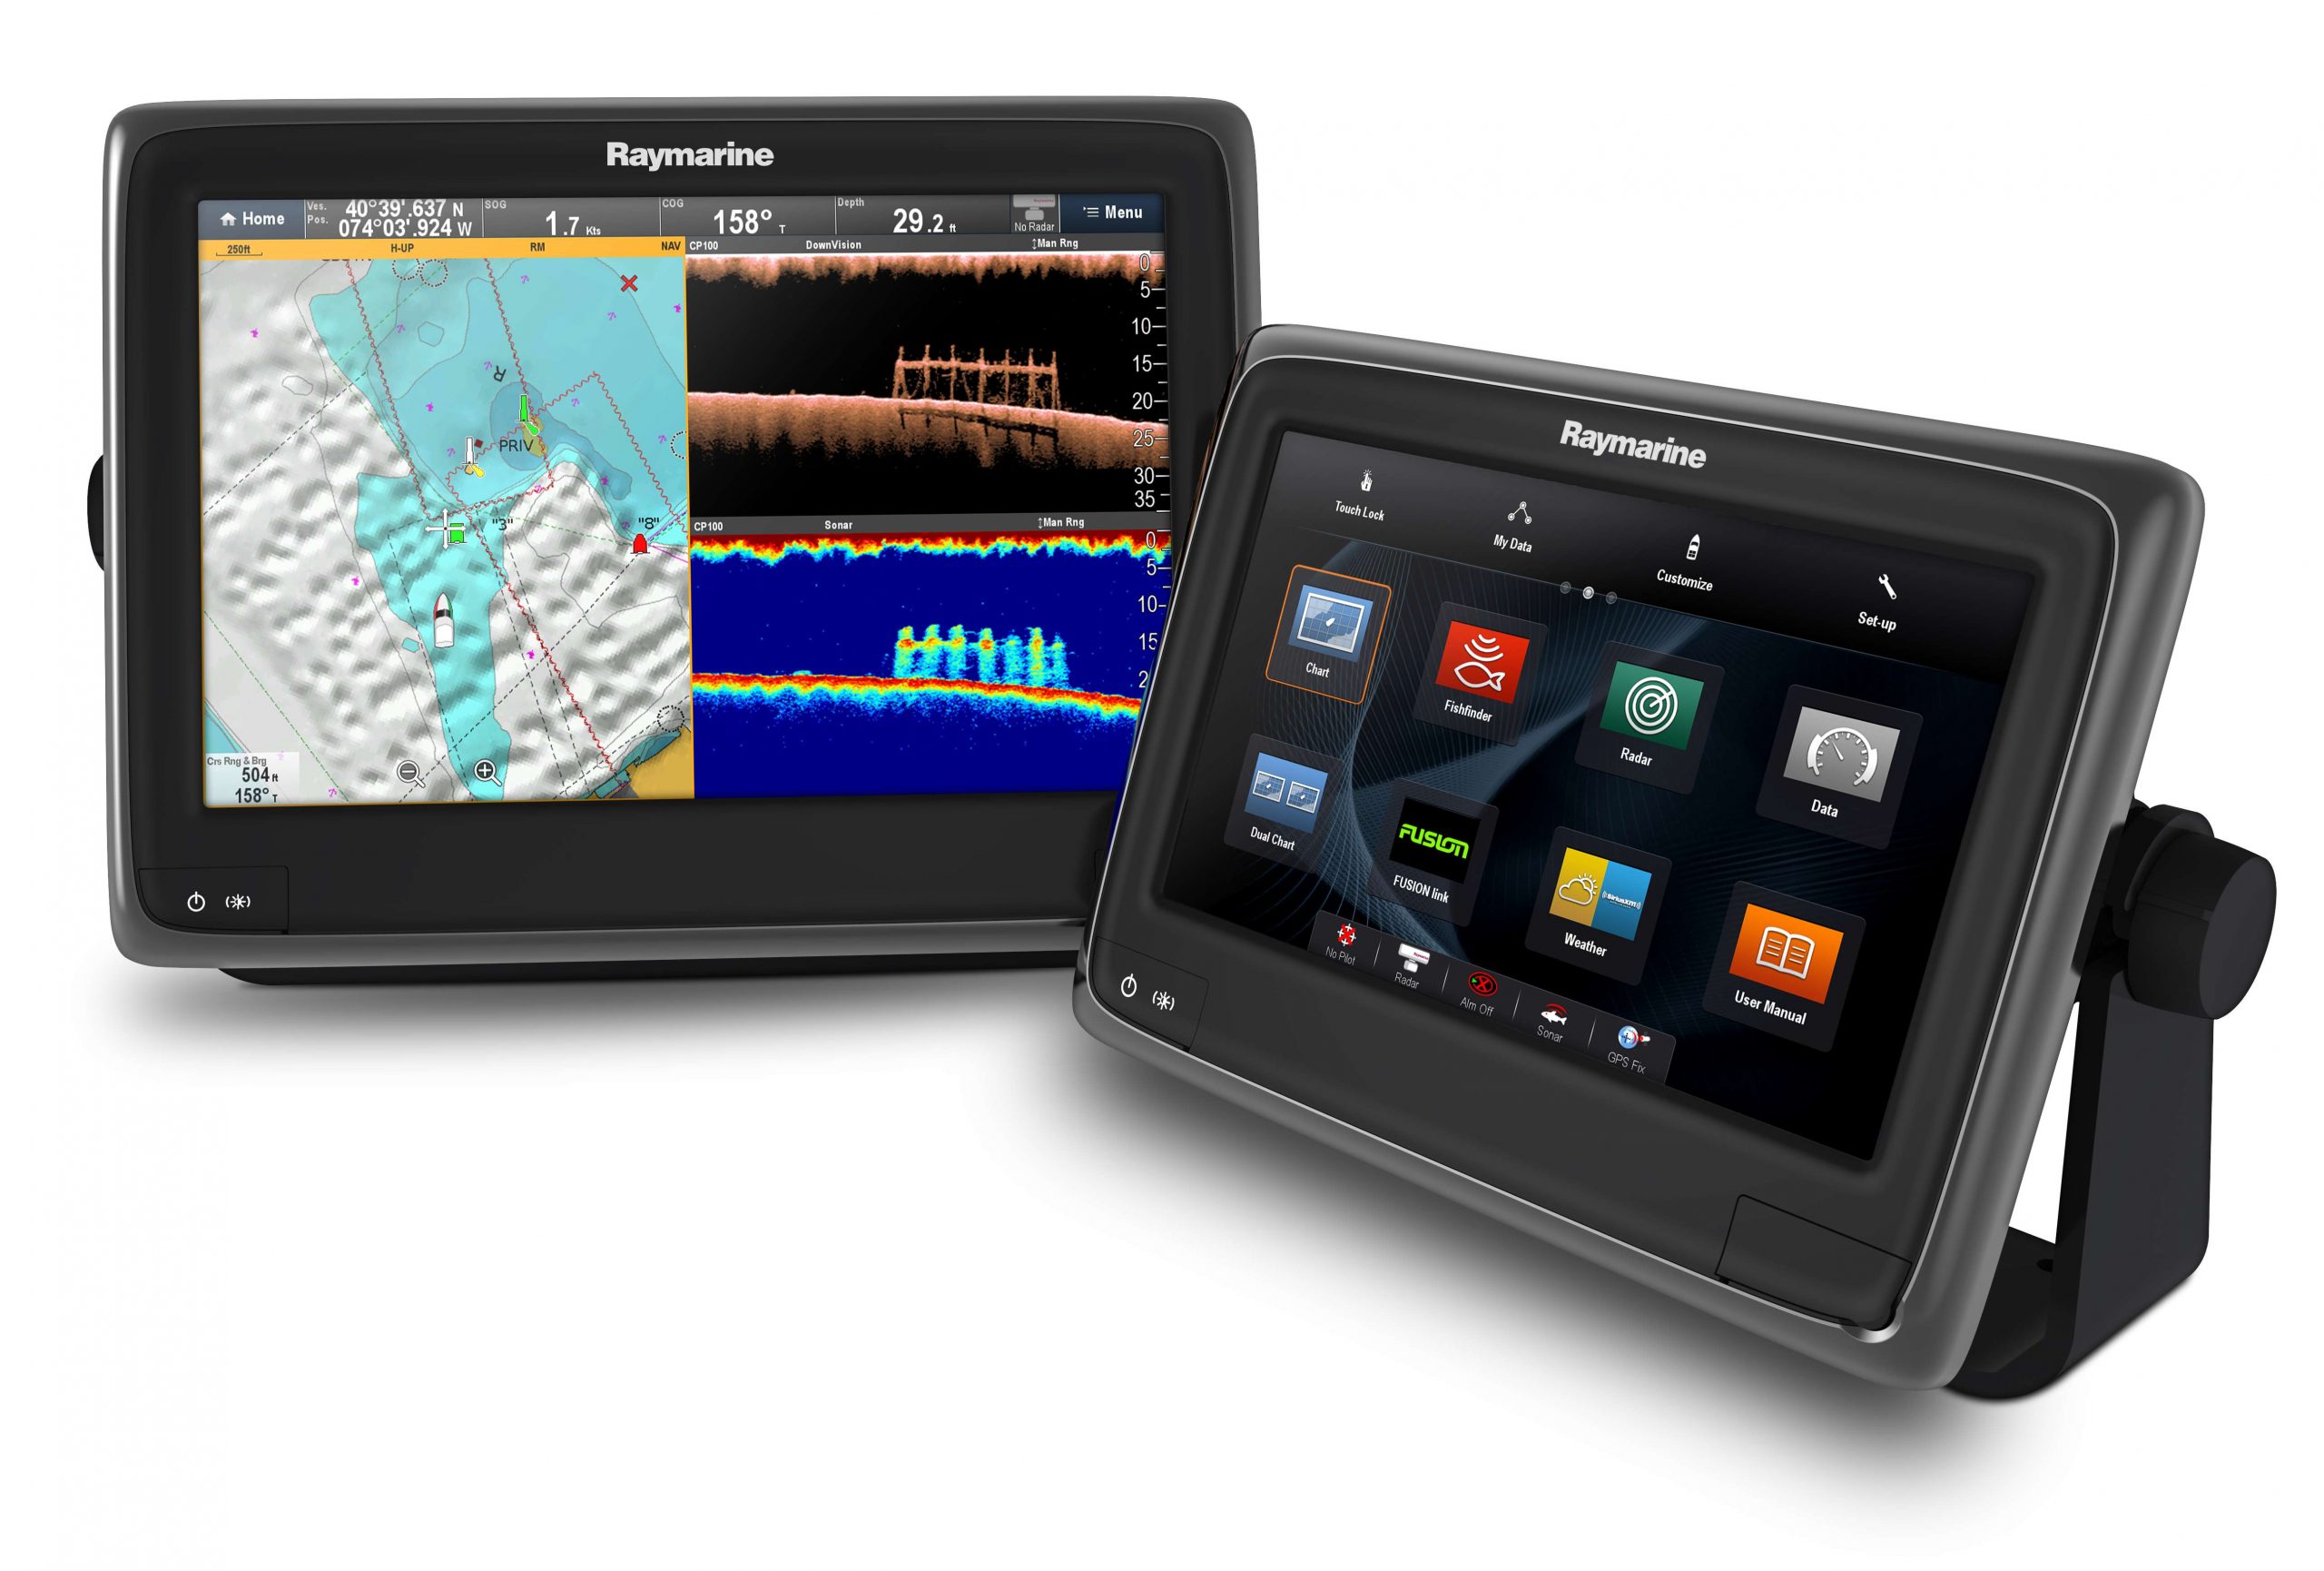 Want electronics that are as easy to use as your smartphone? Raymarine's new a Series can be manipulated in much the same way with pinch-to-zoom controls and lightning quick mapping zoom. To boot, these beauties come with CHIRP technology, a structure-probing view that gives photo-like images thanks to an transducer that pings much faster than standards ones.